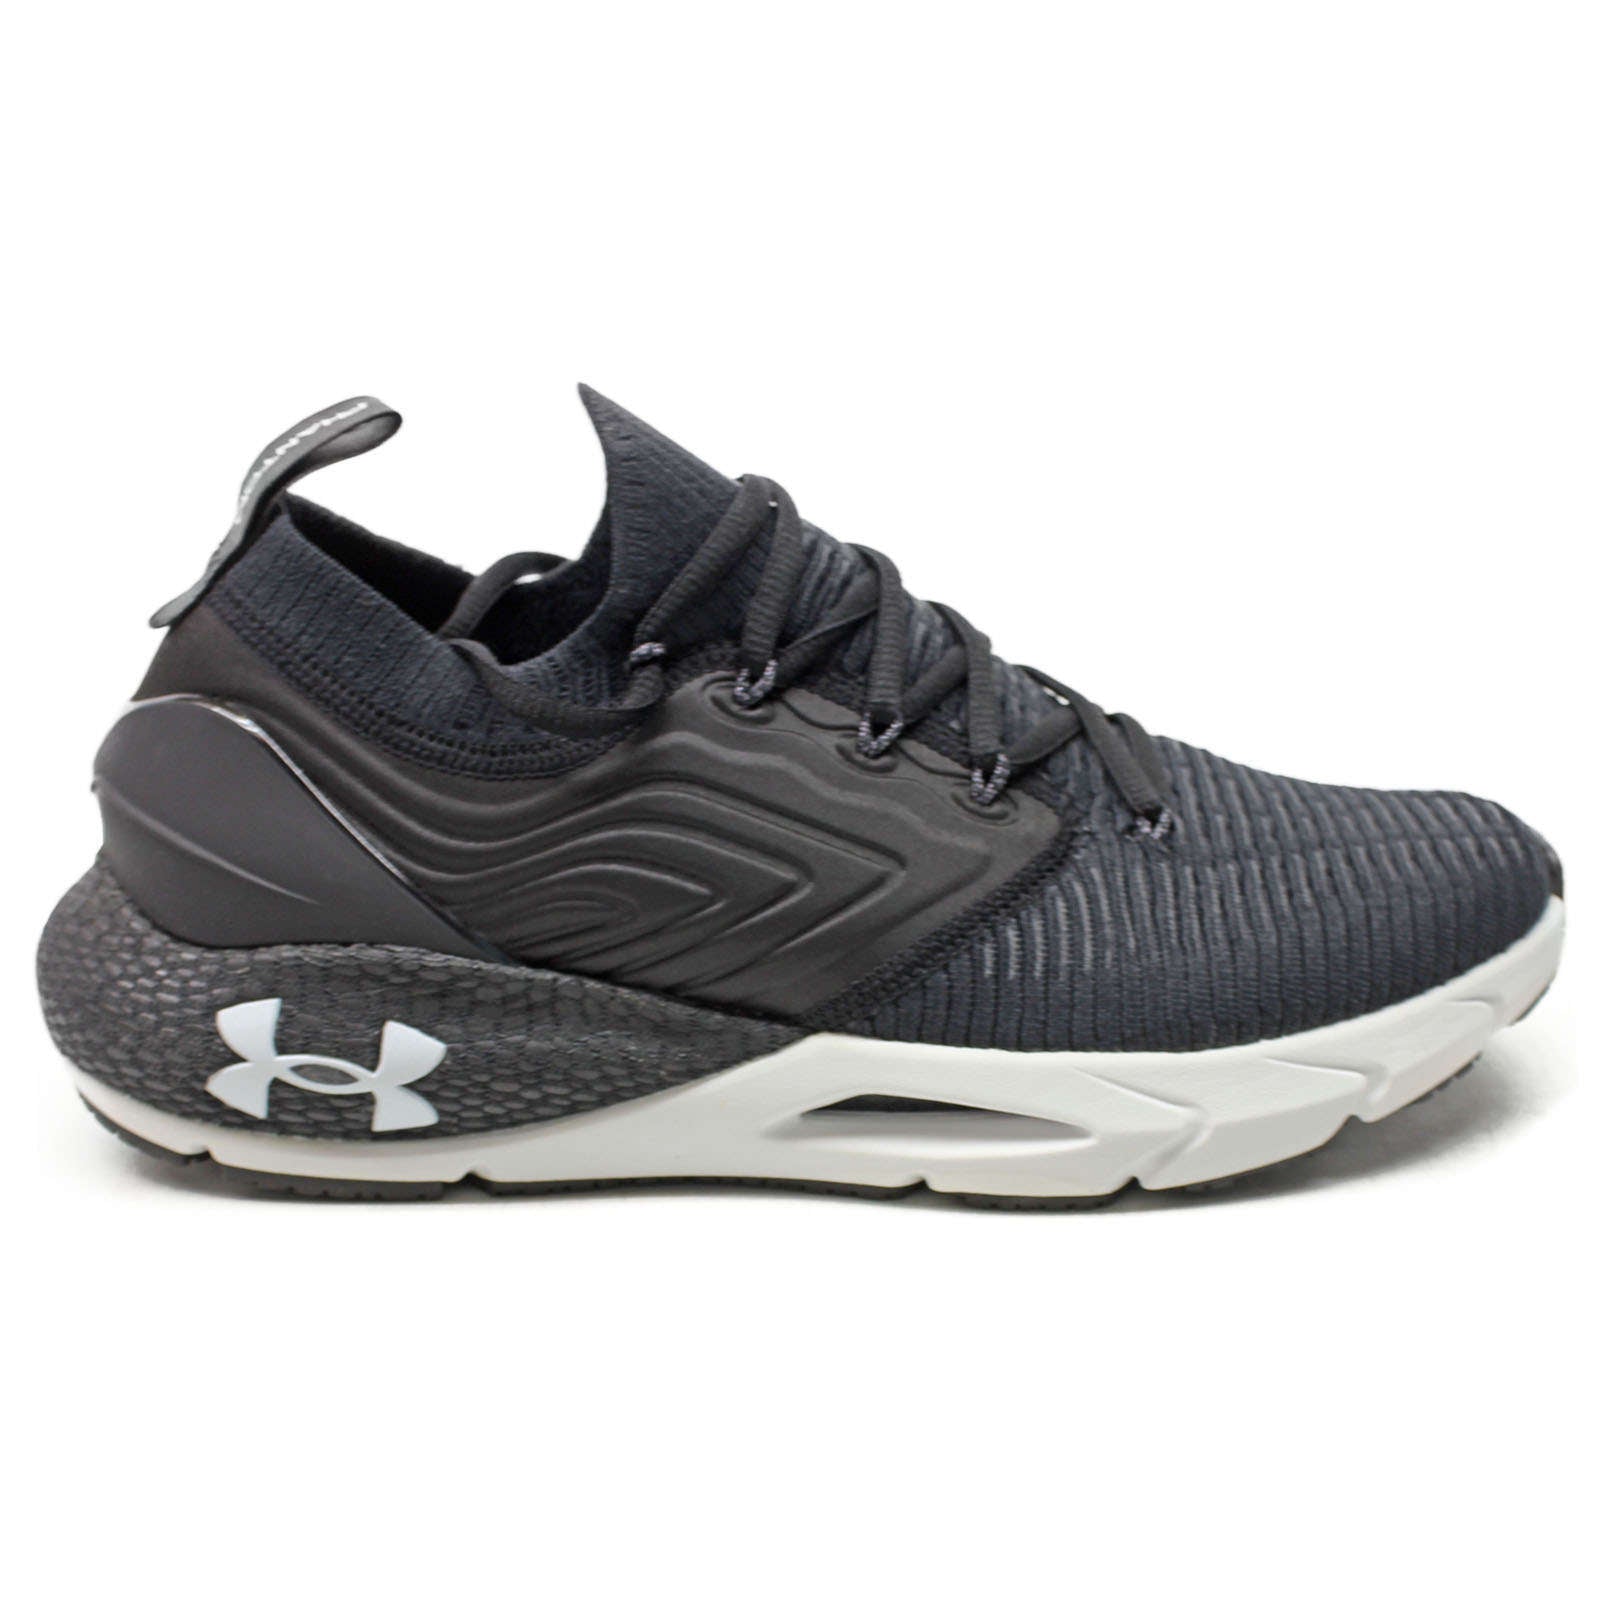 Under Armour HOVR Phantom 2 INKNT Synthetic Textile Men's Low-Top Sneakers#color_black grey